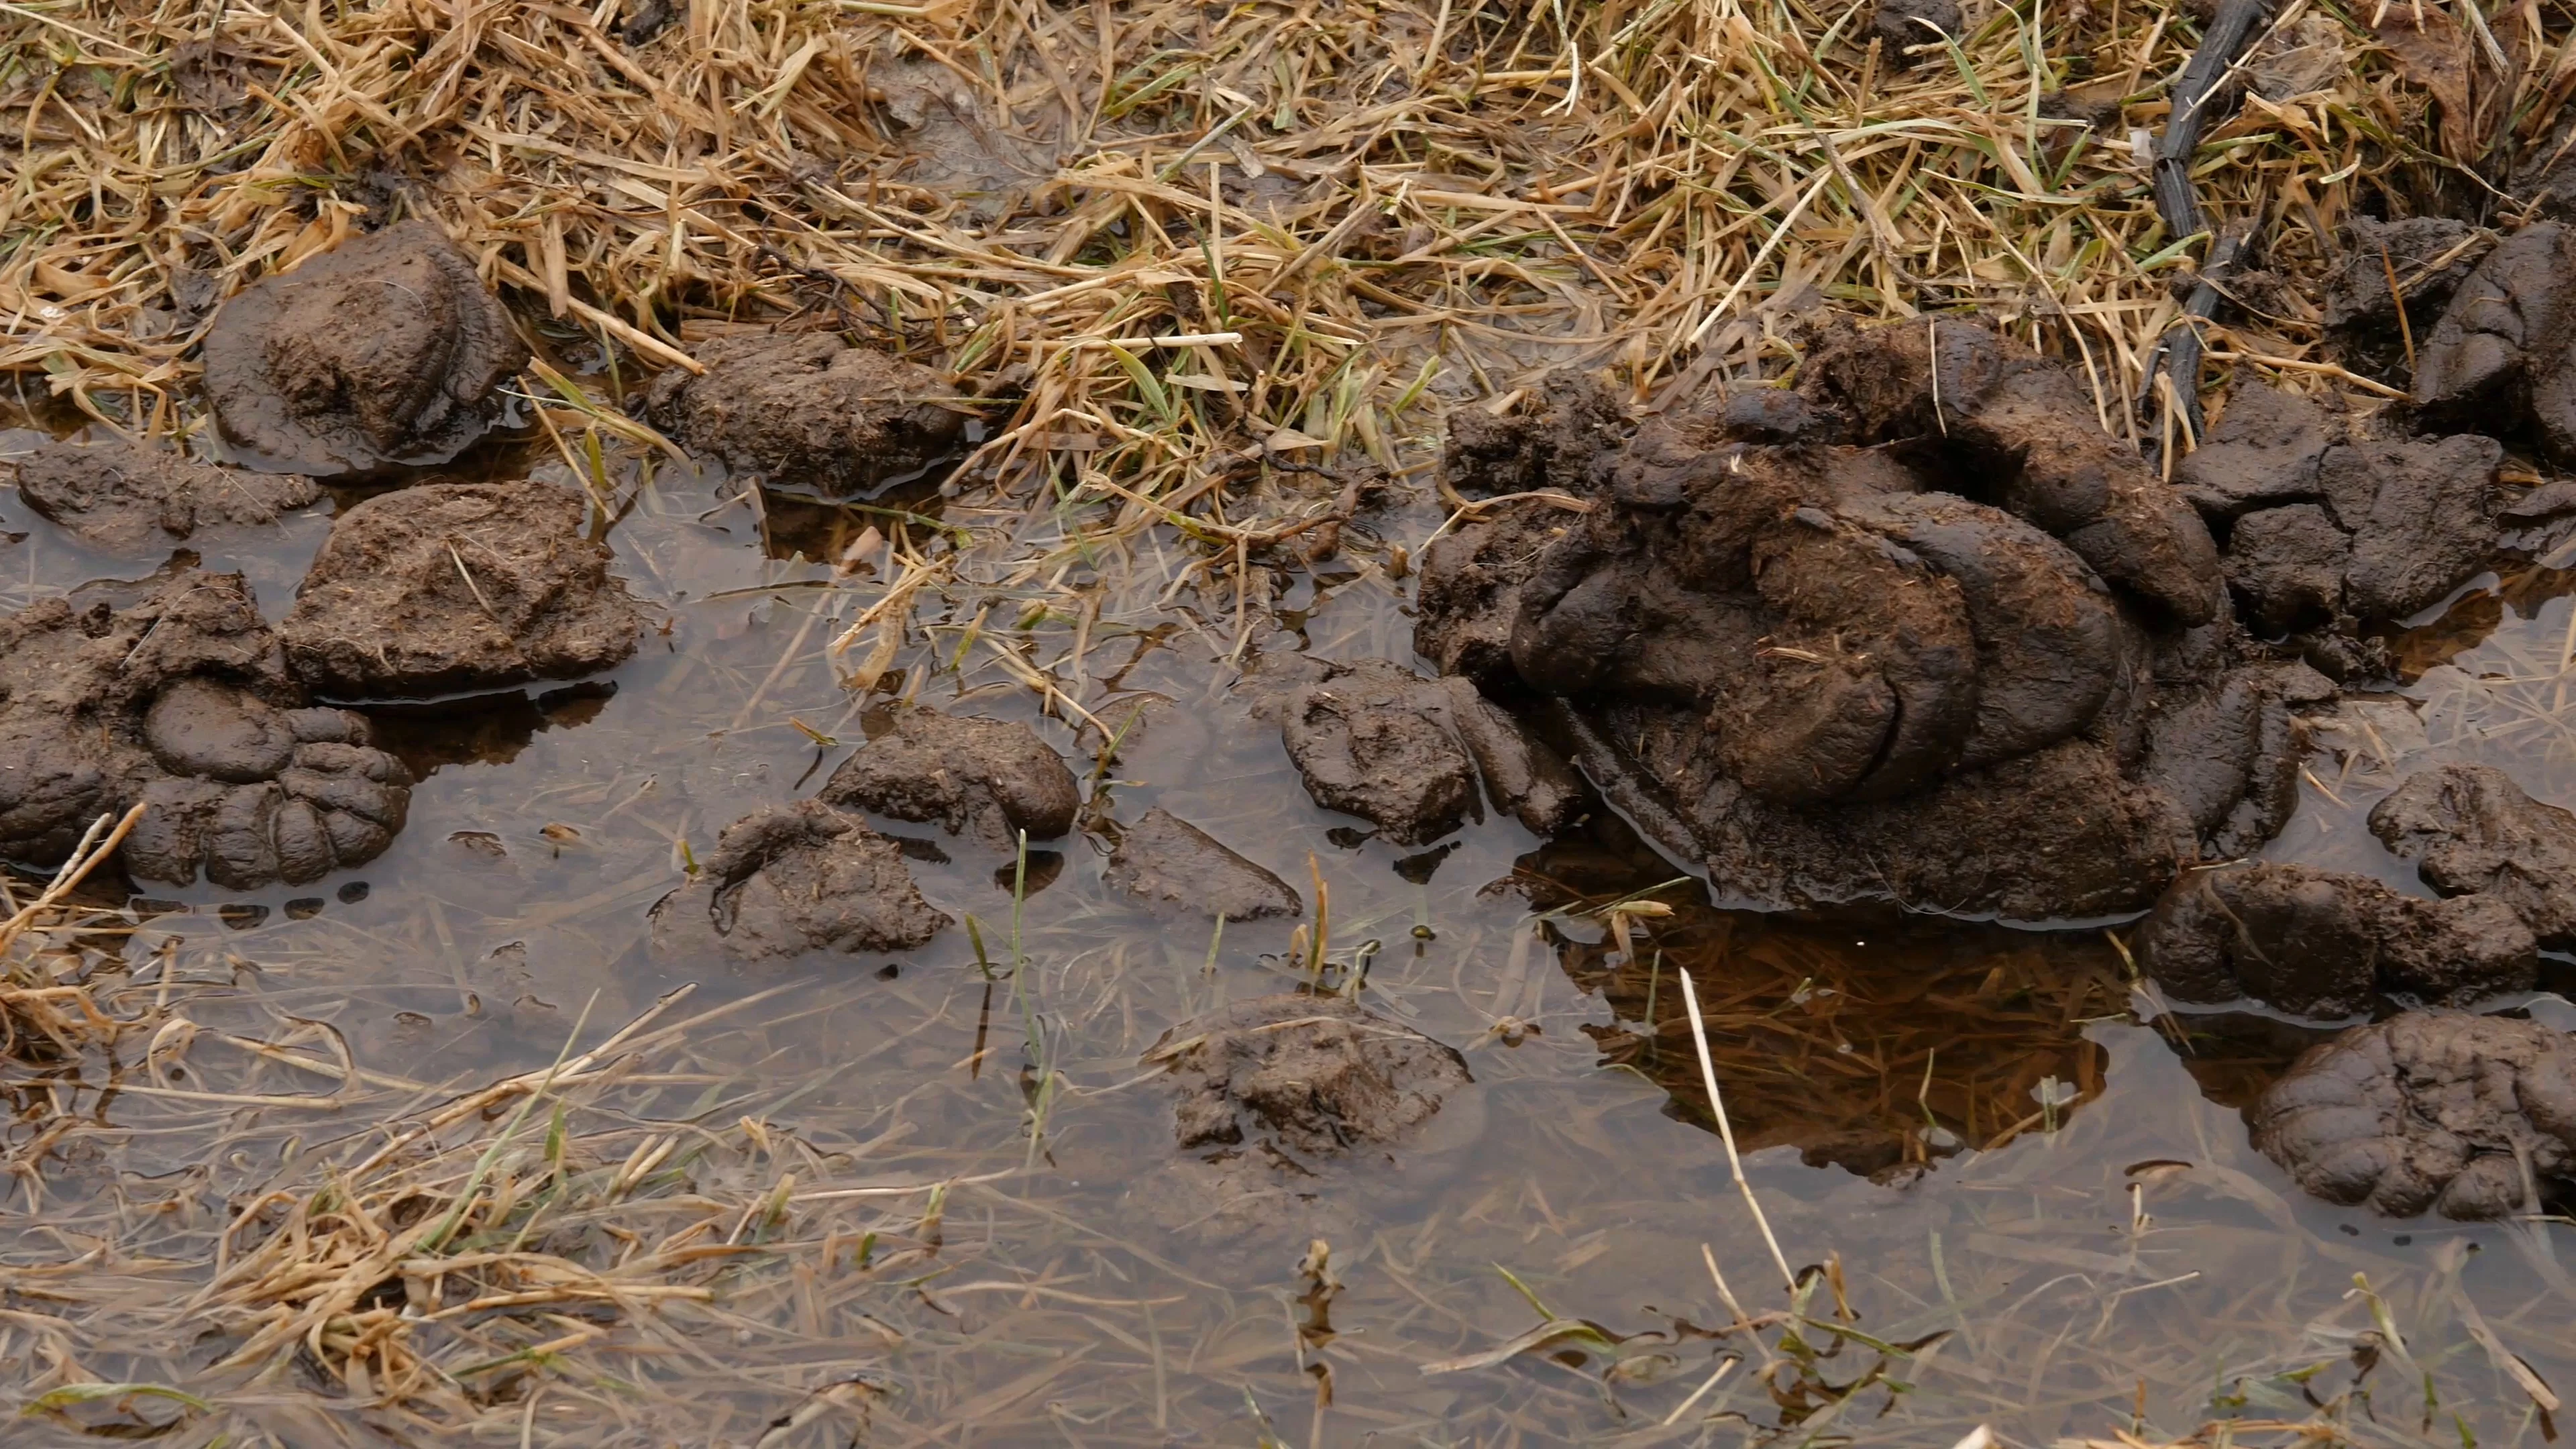 Brook Polluted With Cow Manure Fresh Cow Excrement Countryside